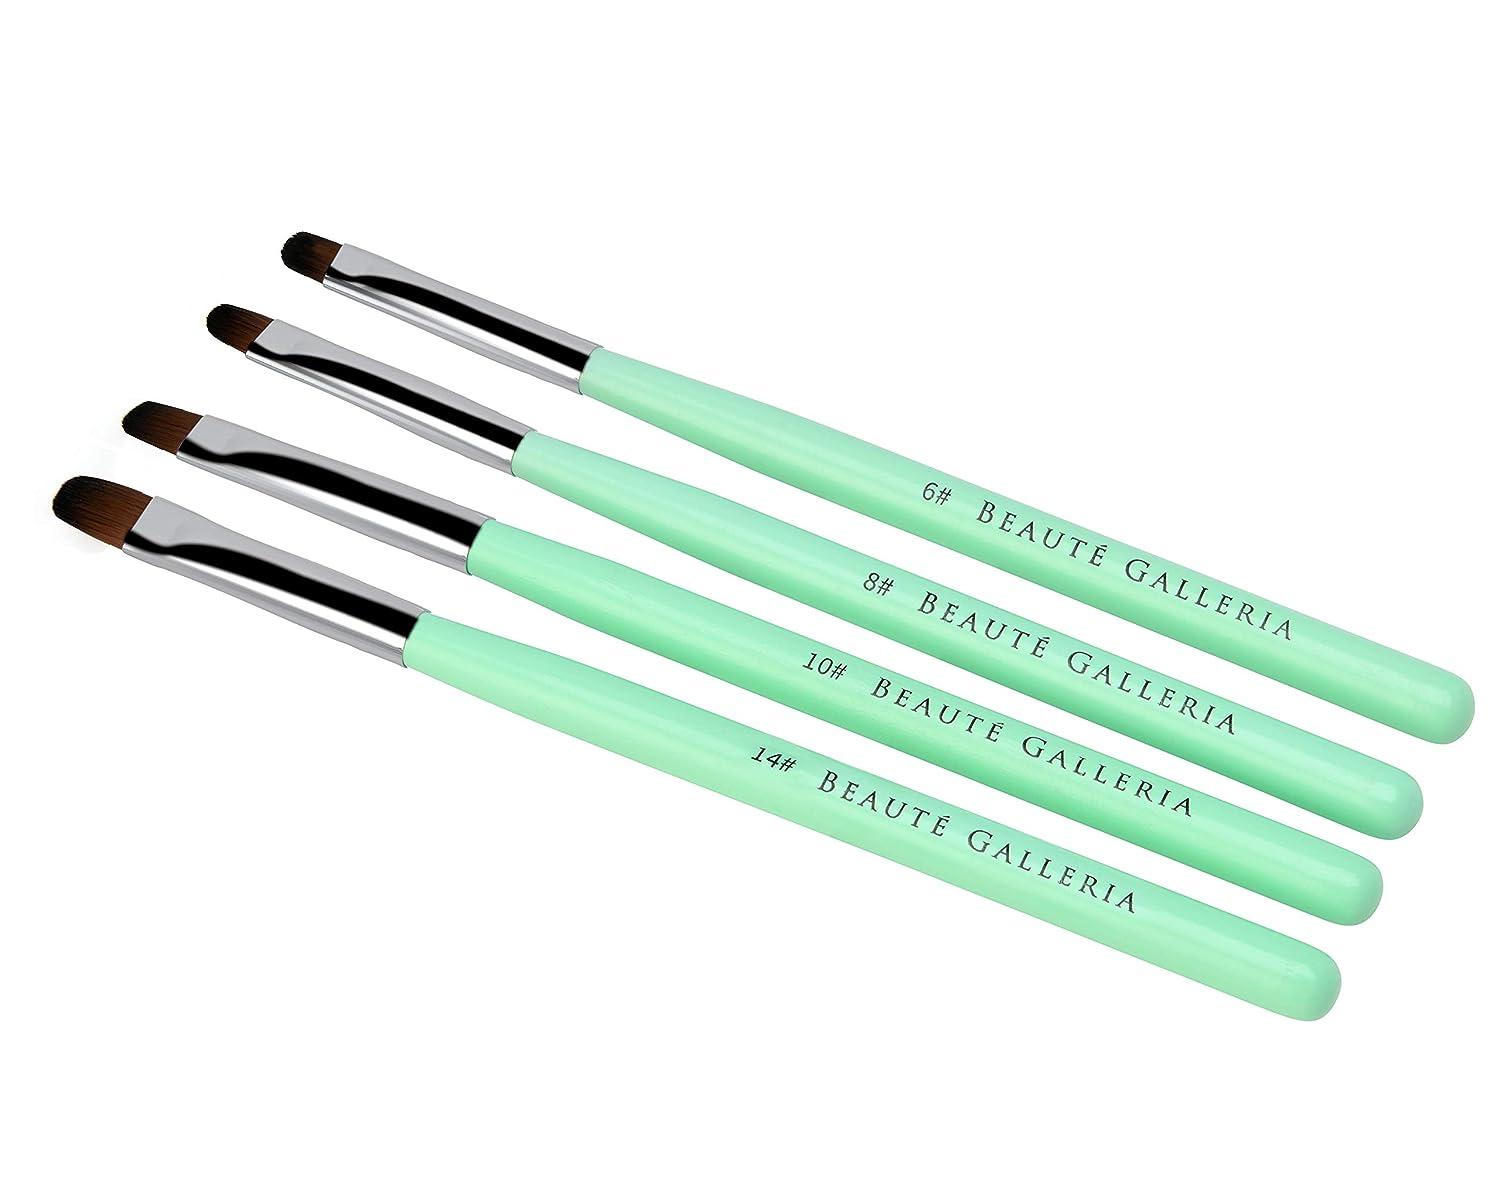 5 Pieces Nail Art Liners and Striping Brushes Set – Beaute Galleria